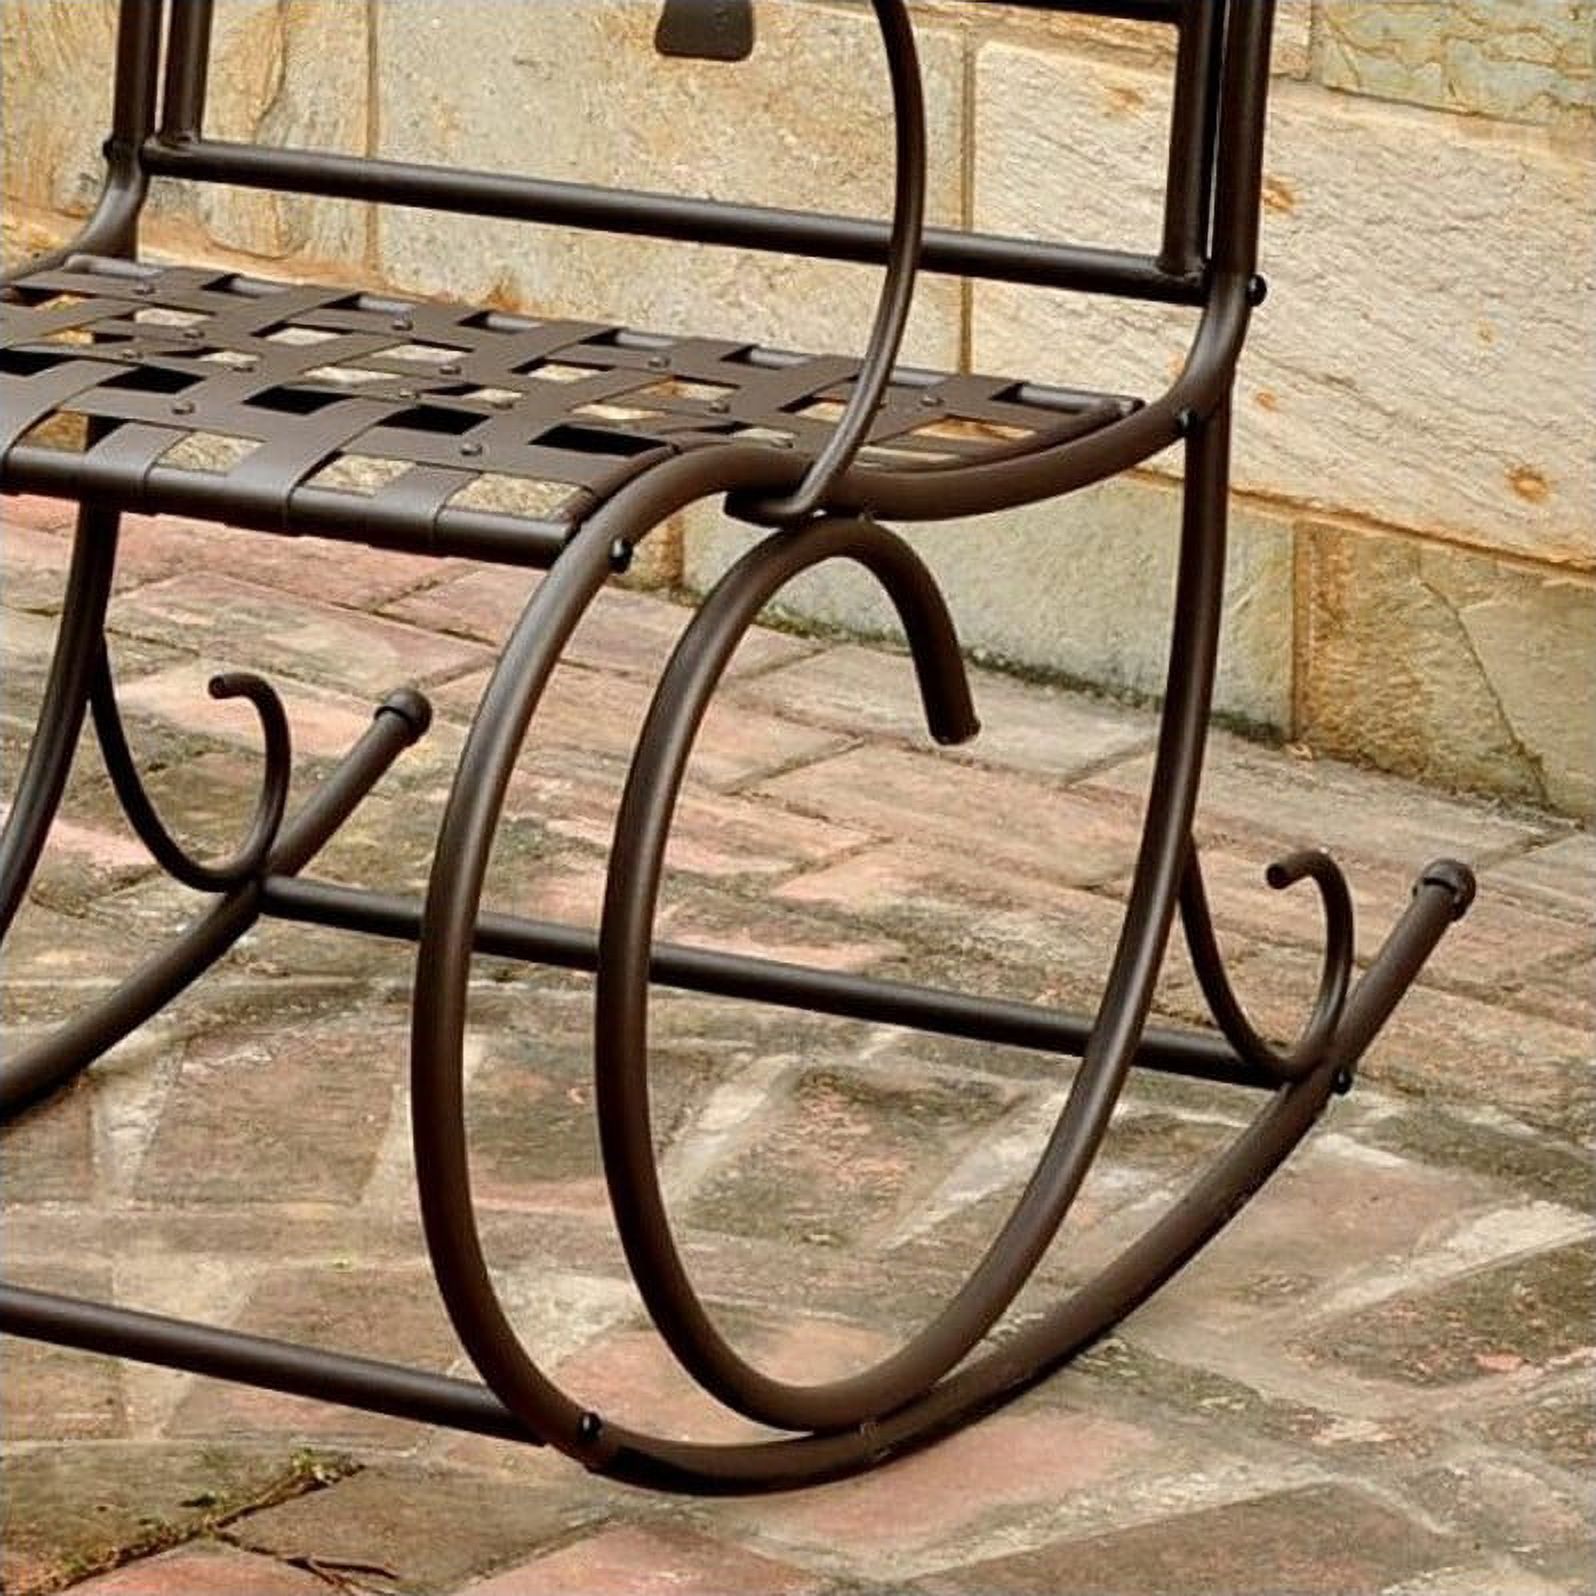 Pemberly Row Iron High-Back Patio Rocker in Brown - image 2 of 2